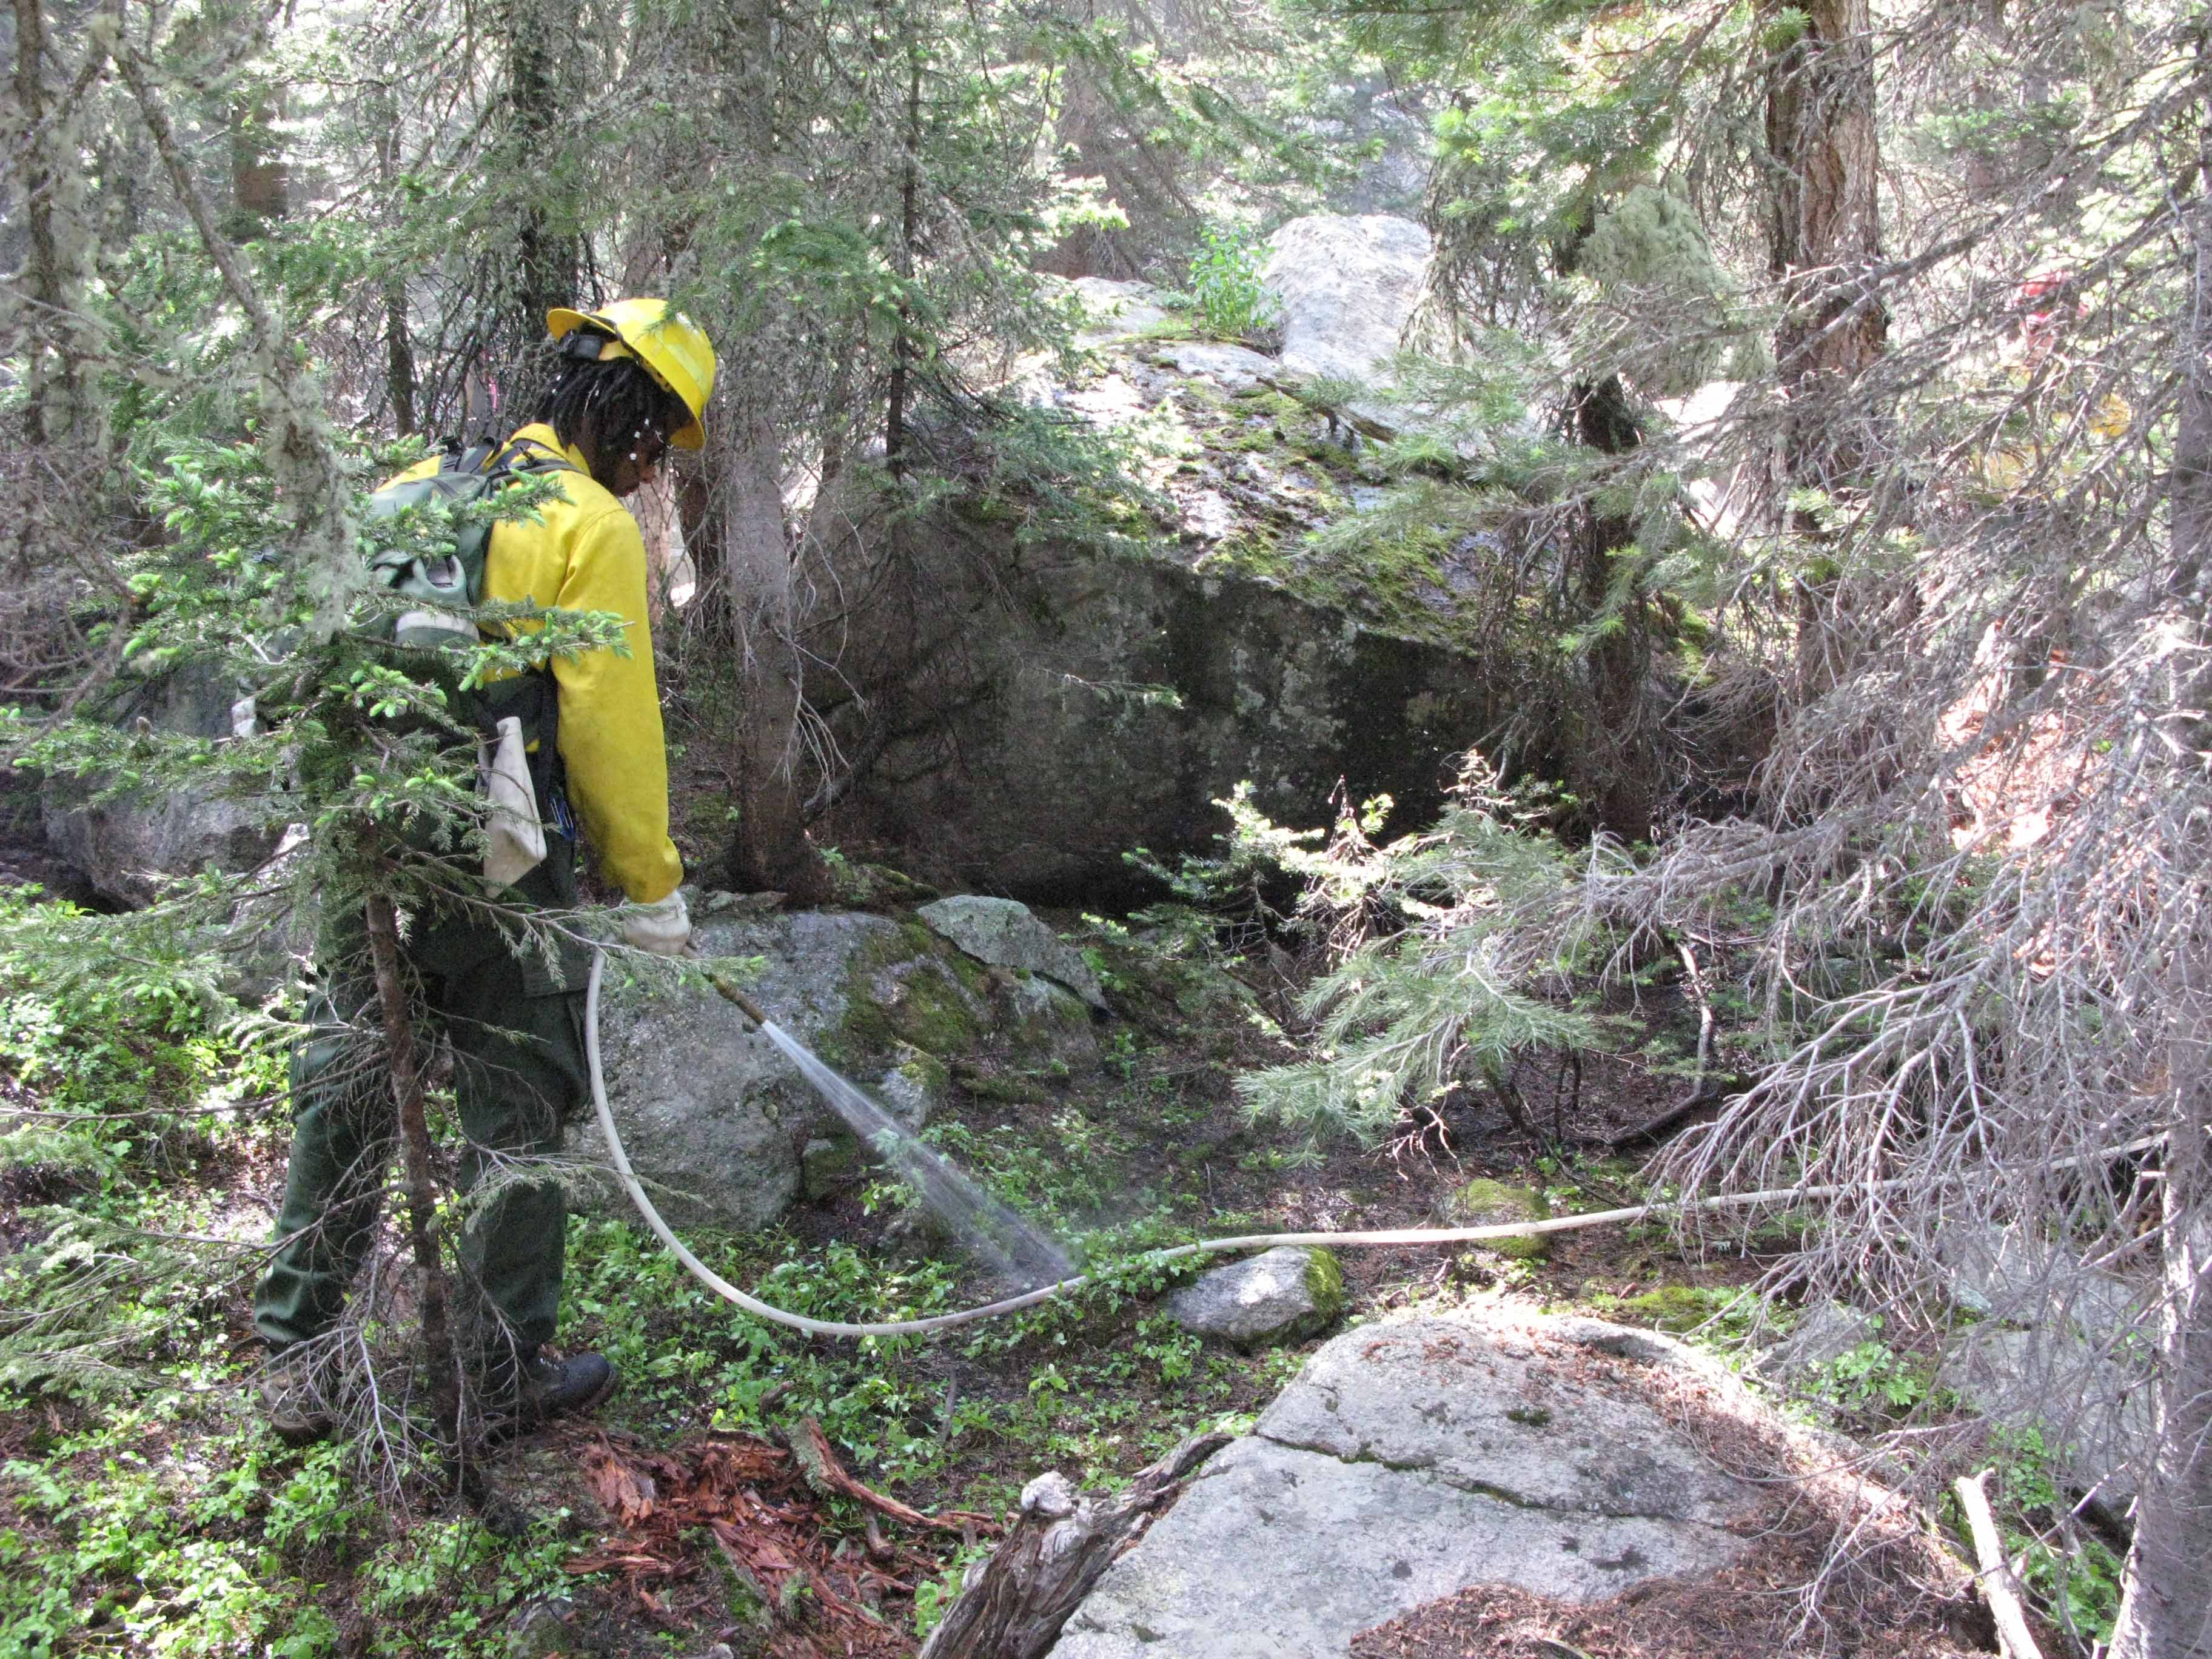 Spraying water on smoldering duff on Spruce Fire (2)